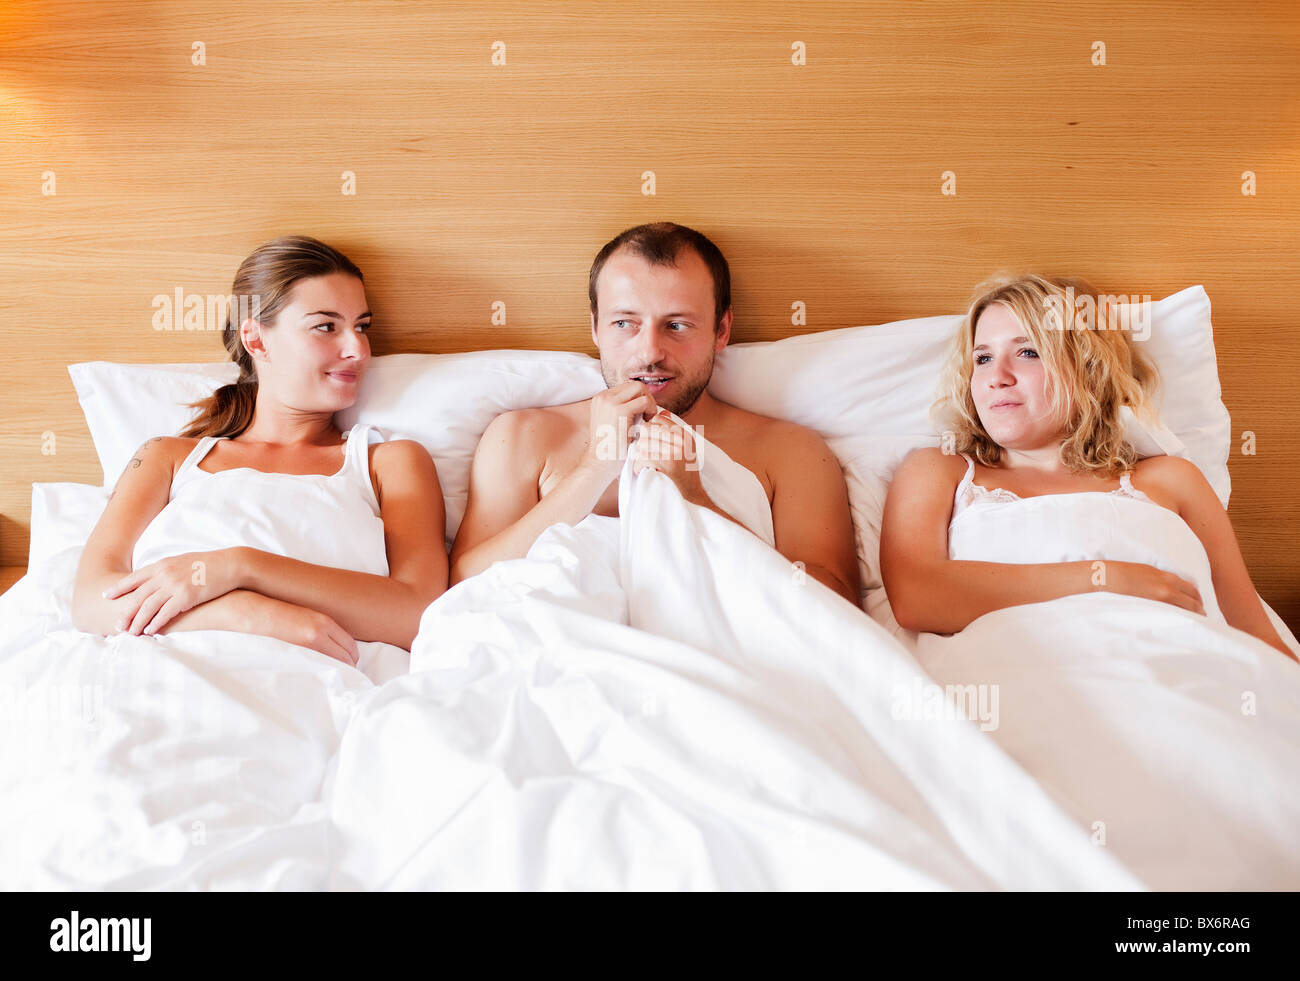 marriage, marital triangle, man, woman, women, bed, sex Stock Photo picture